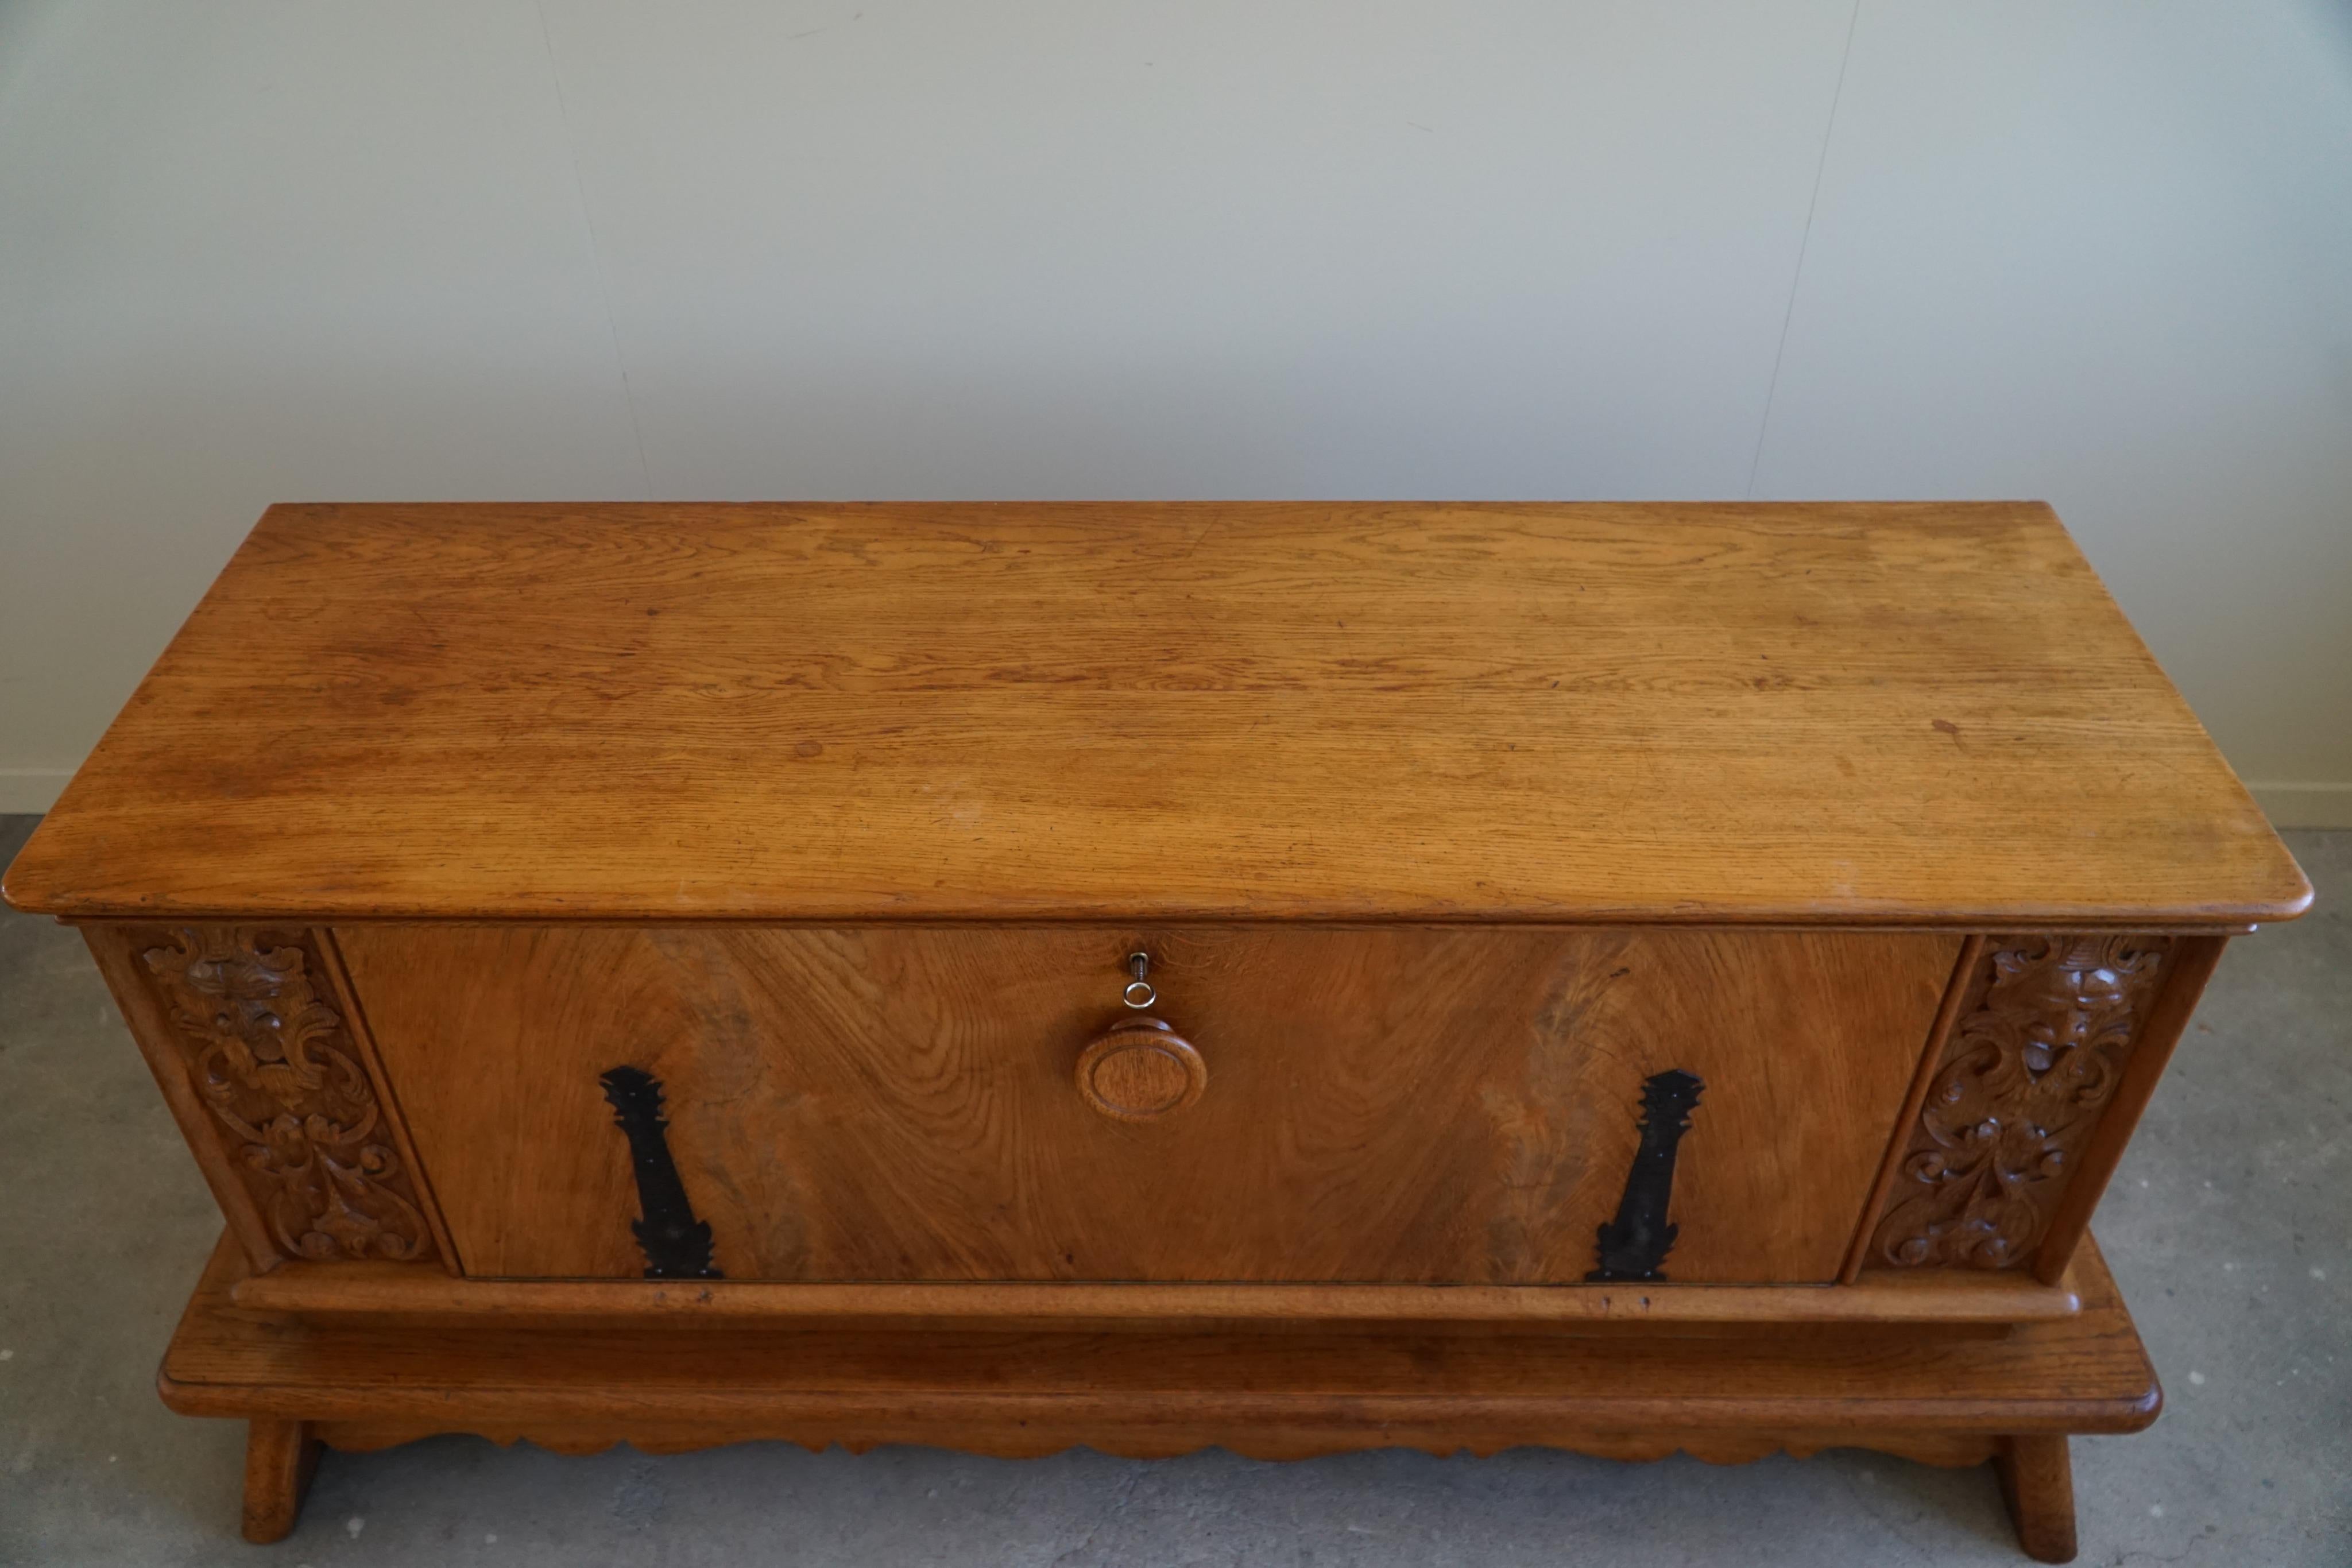 Danish Art Deco Sideboard Credenza in Solid Oak, Early 20th Century For Sale 2